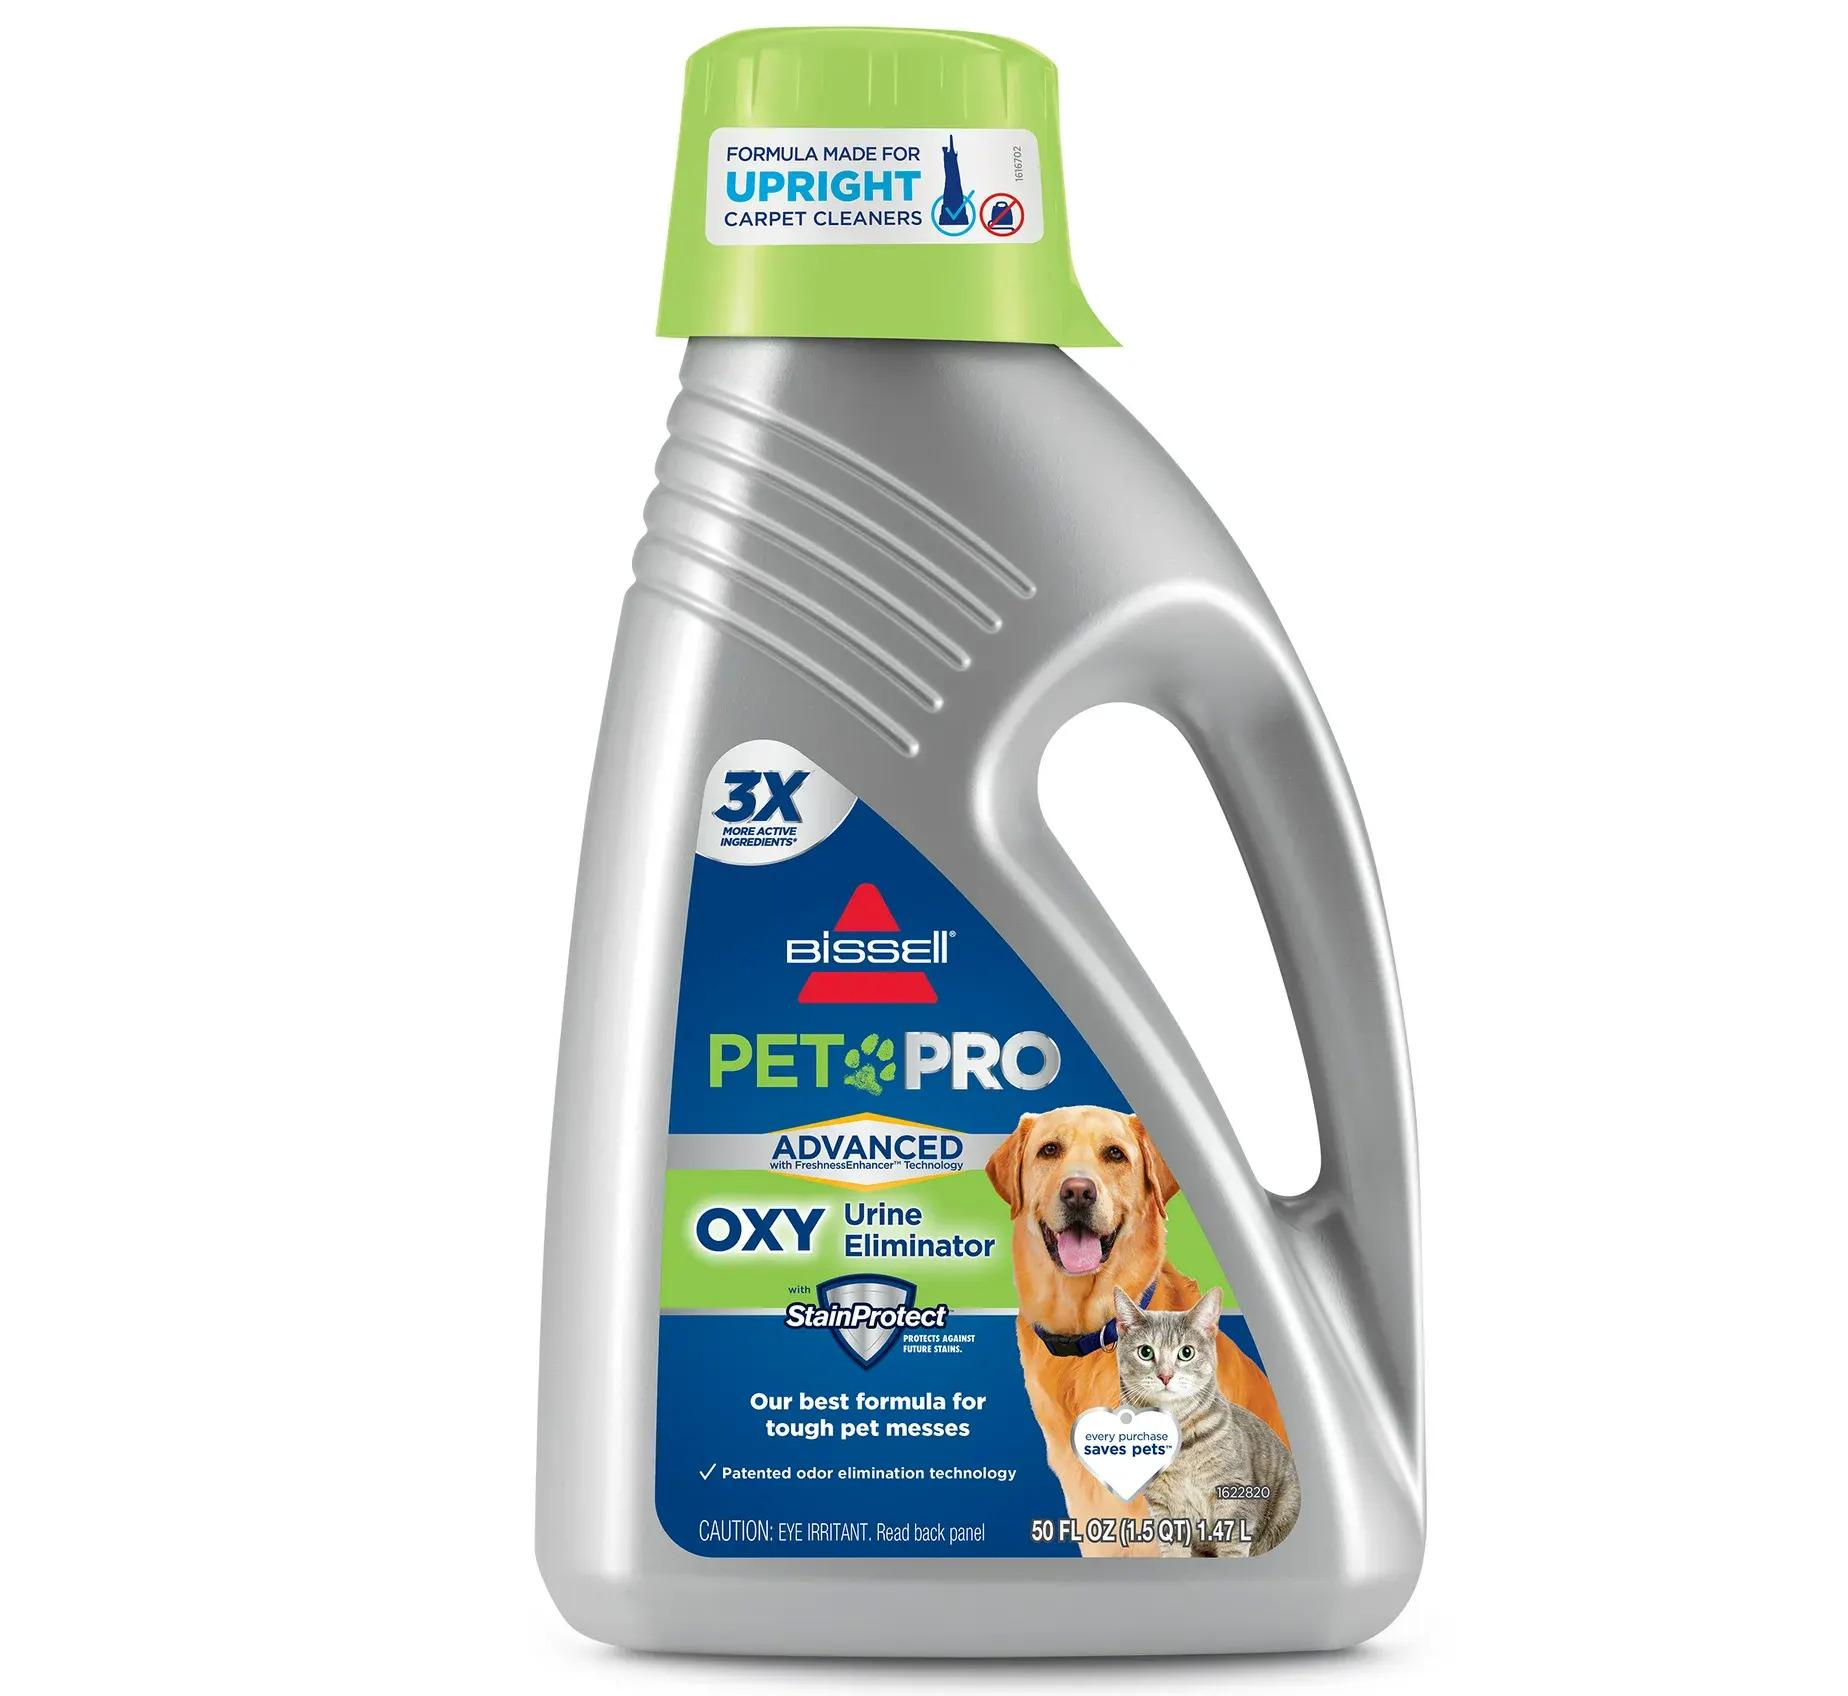 Bissell Pet Pro Oxy Urine Stain and Odor Eliminator Carpet Cleaner for $9.89